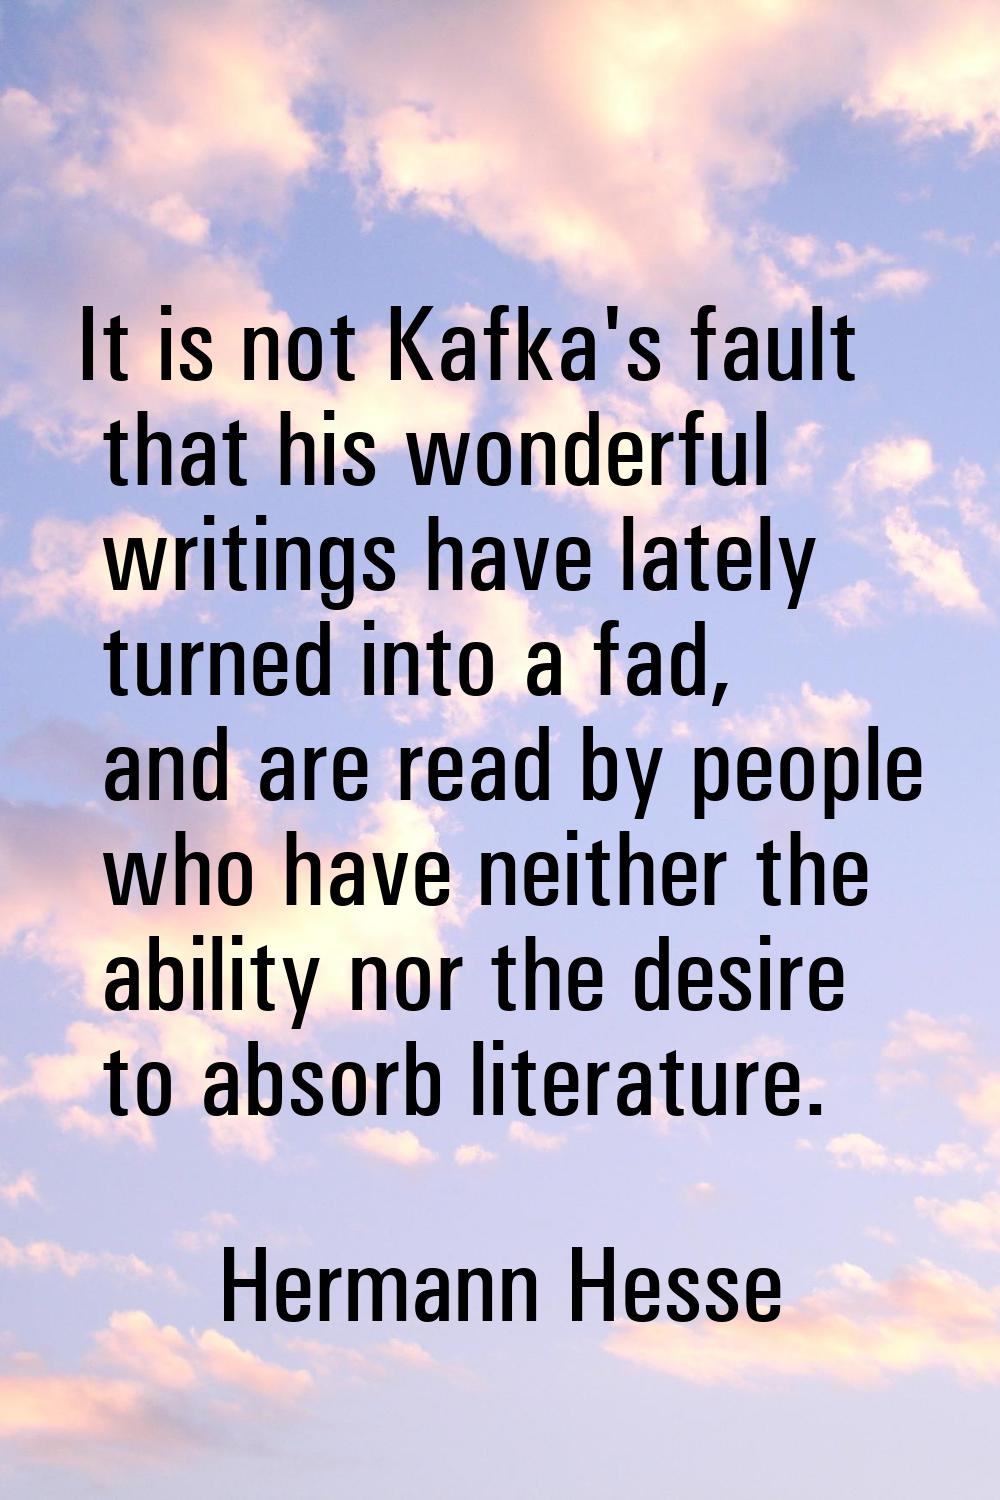 It is not Kafka's fault that his wonderful writings have lately turned into a fad, and are read by 